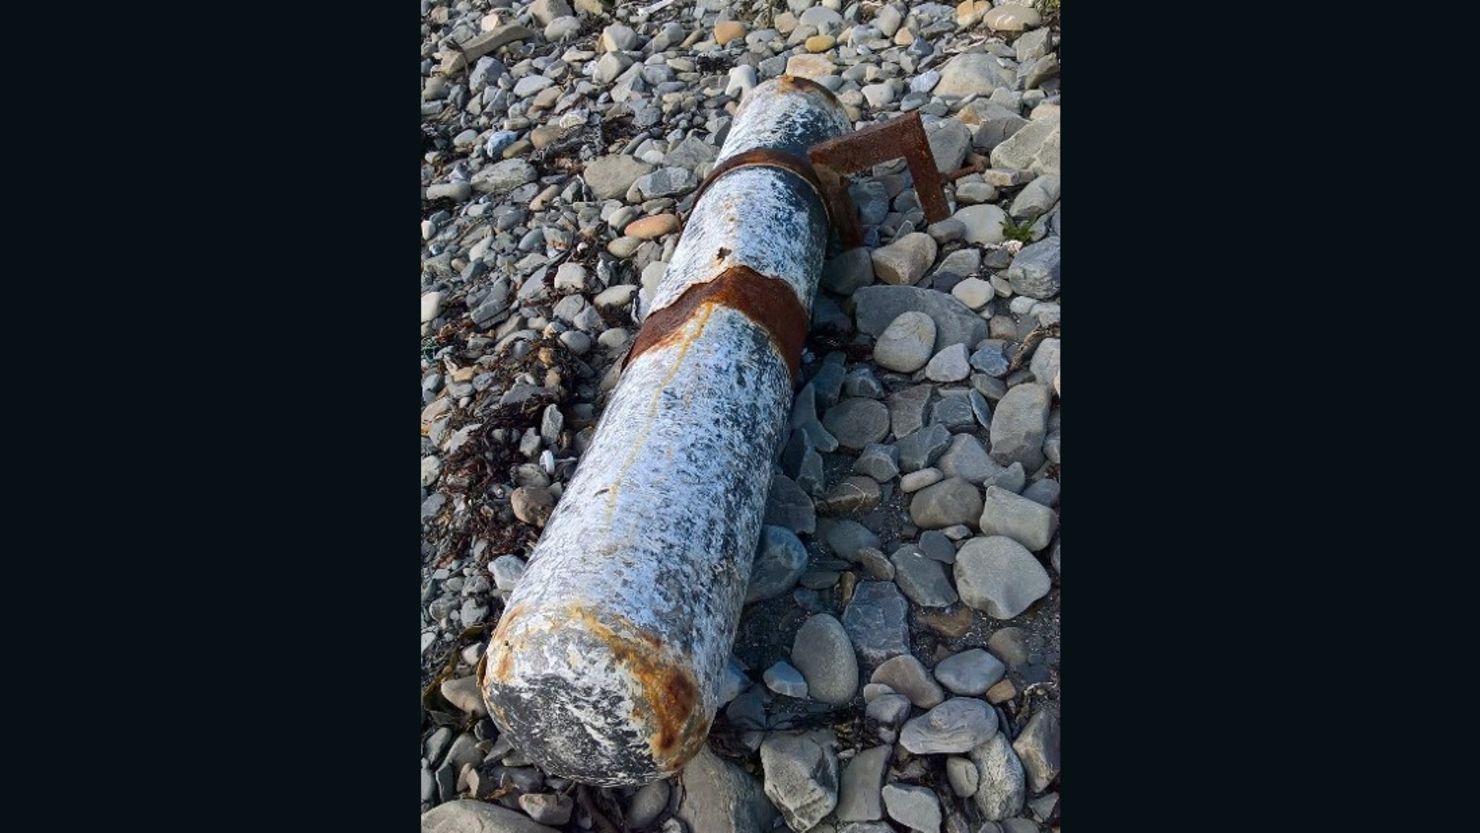 Cocaine had been stuffed inside a torpedo-like canister that washed ashore on Ireland's west coast.